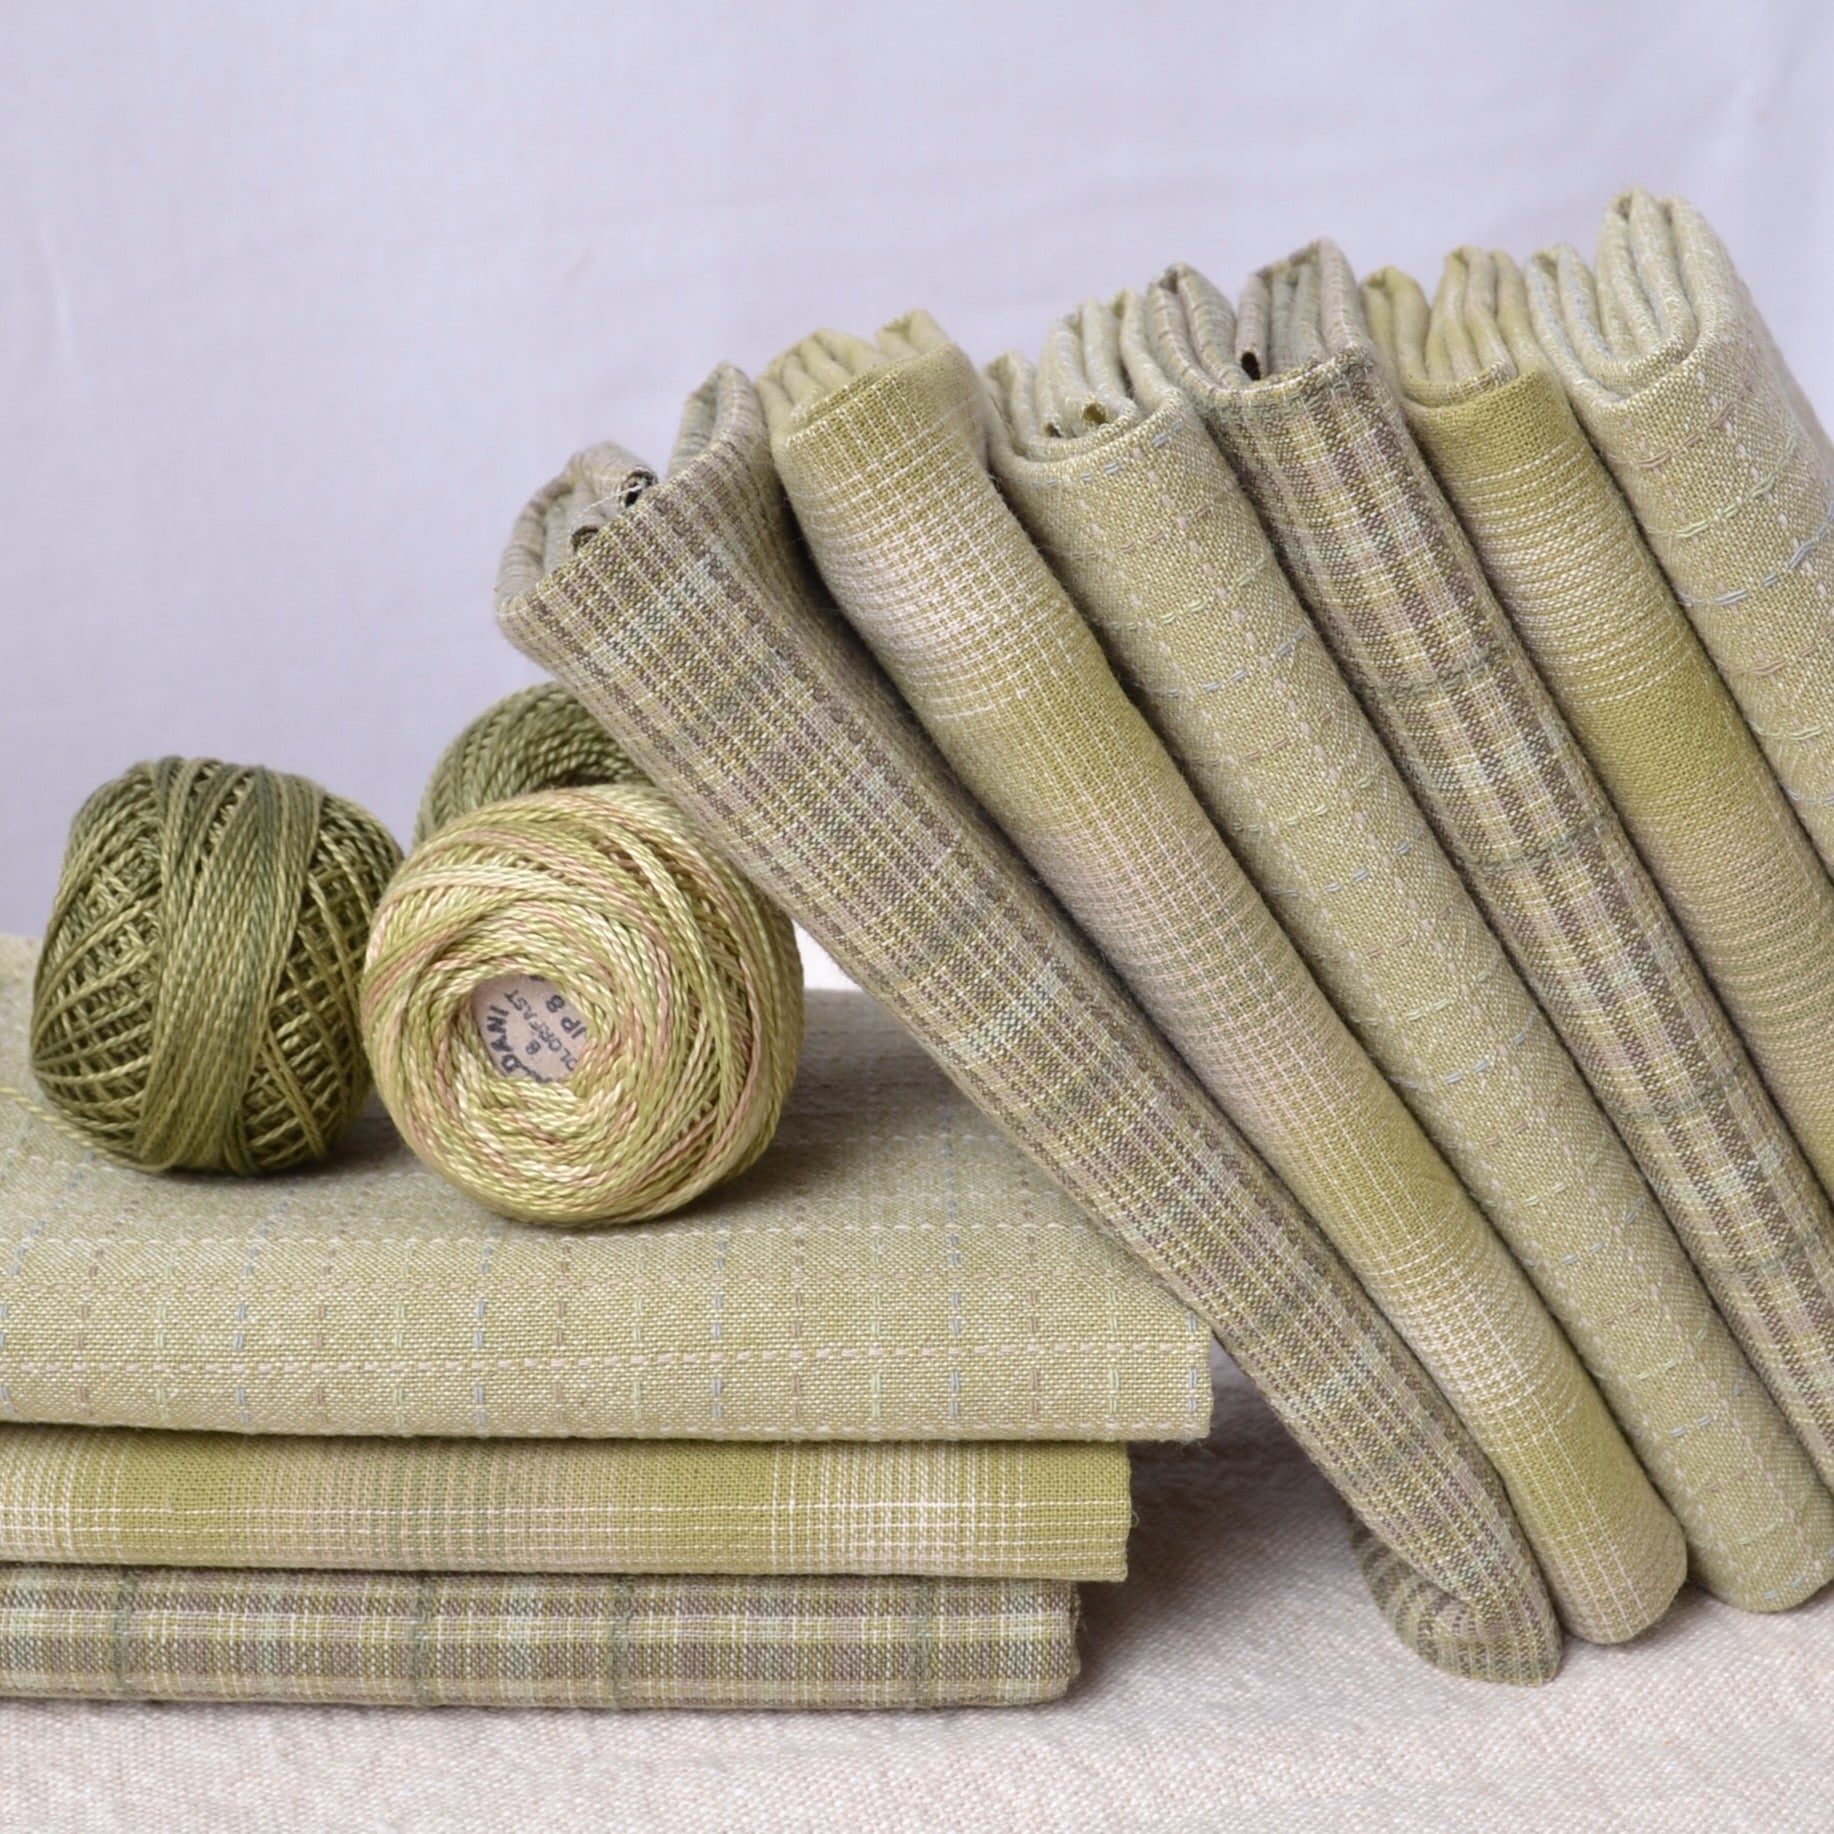 dyed yarn cotton sewing fabric, bundle of 3 greens